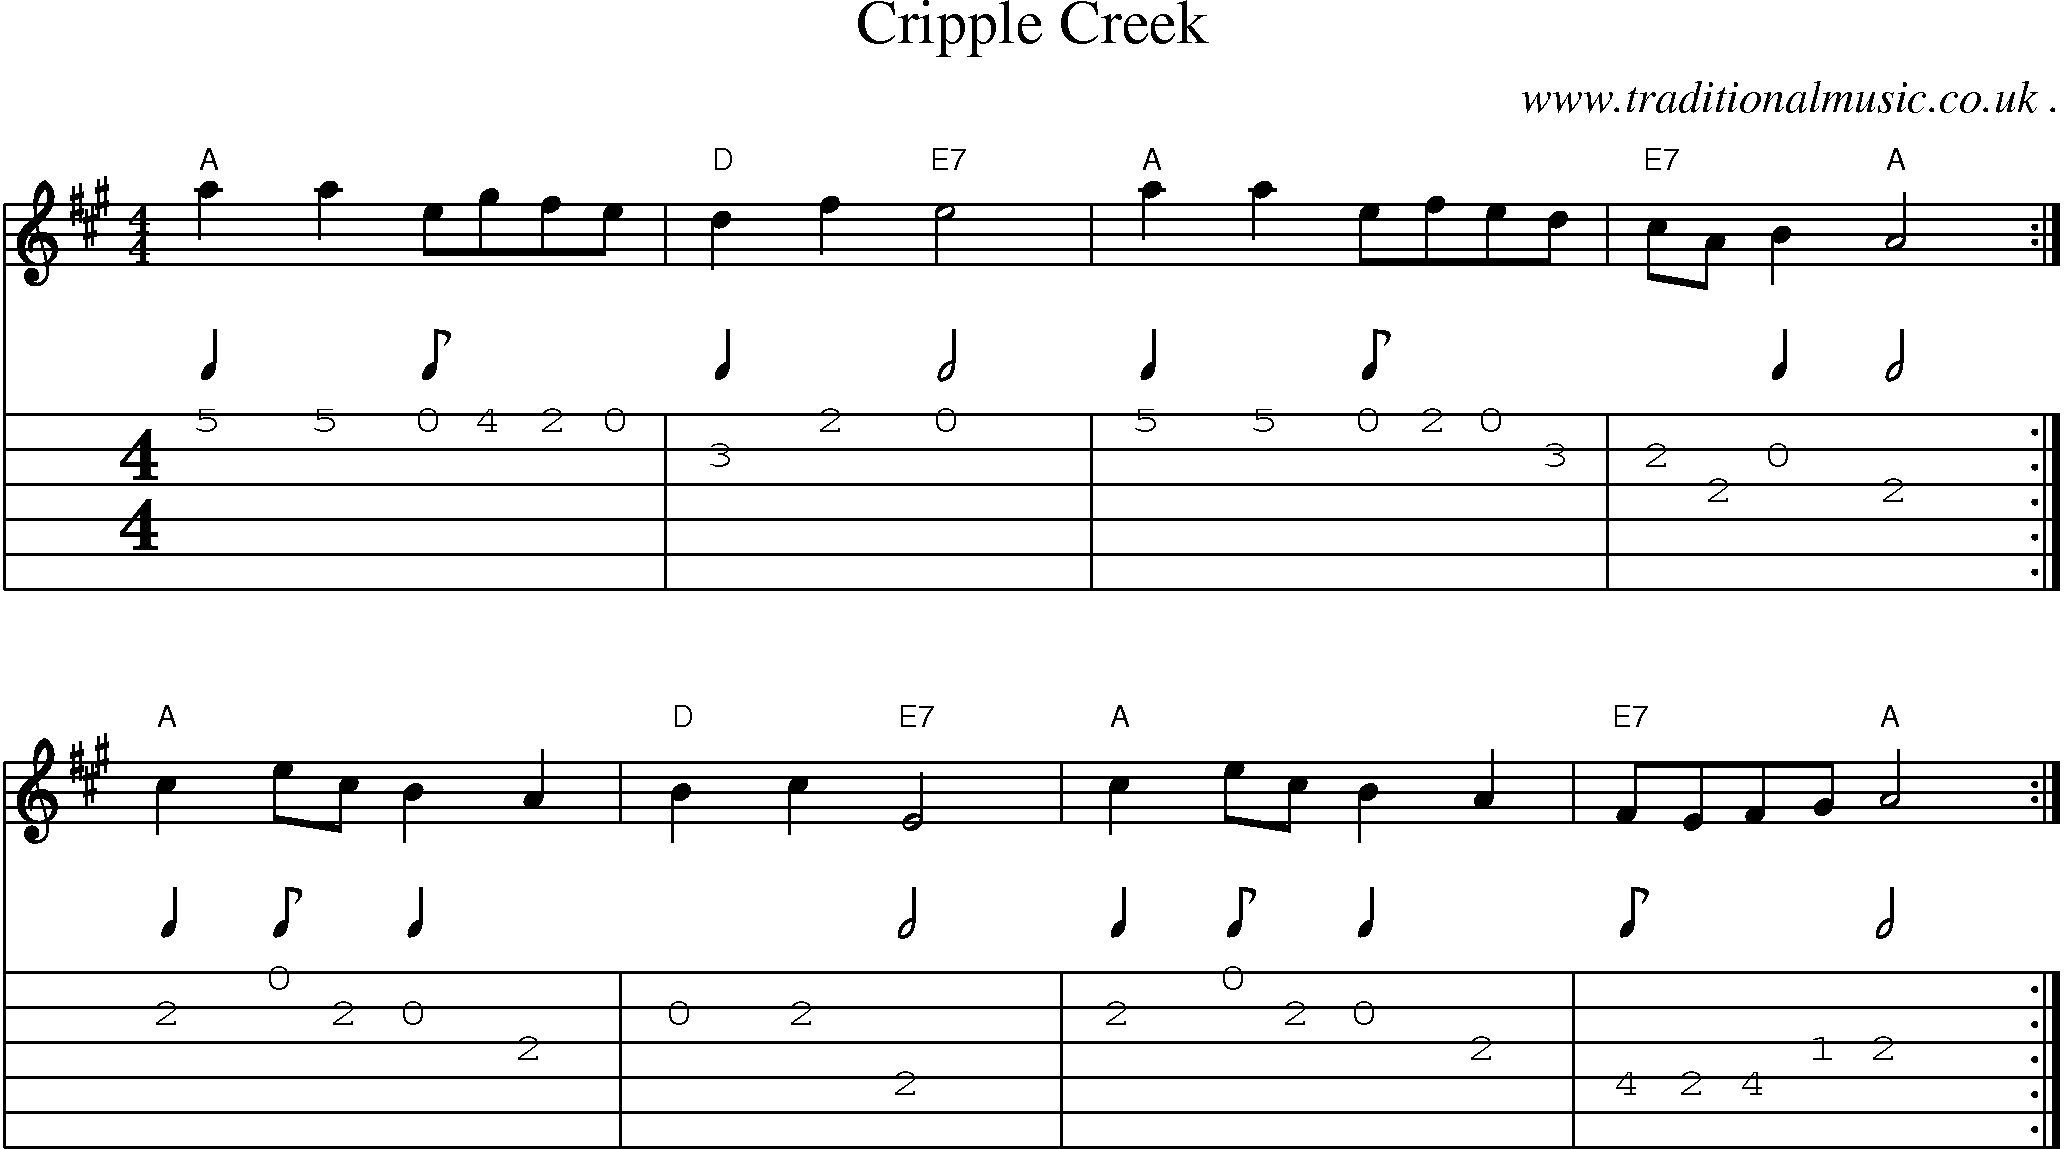 Sheet-Music and Guitar Tabs for Cripple Creek